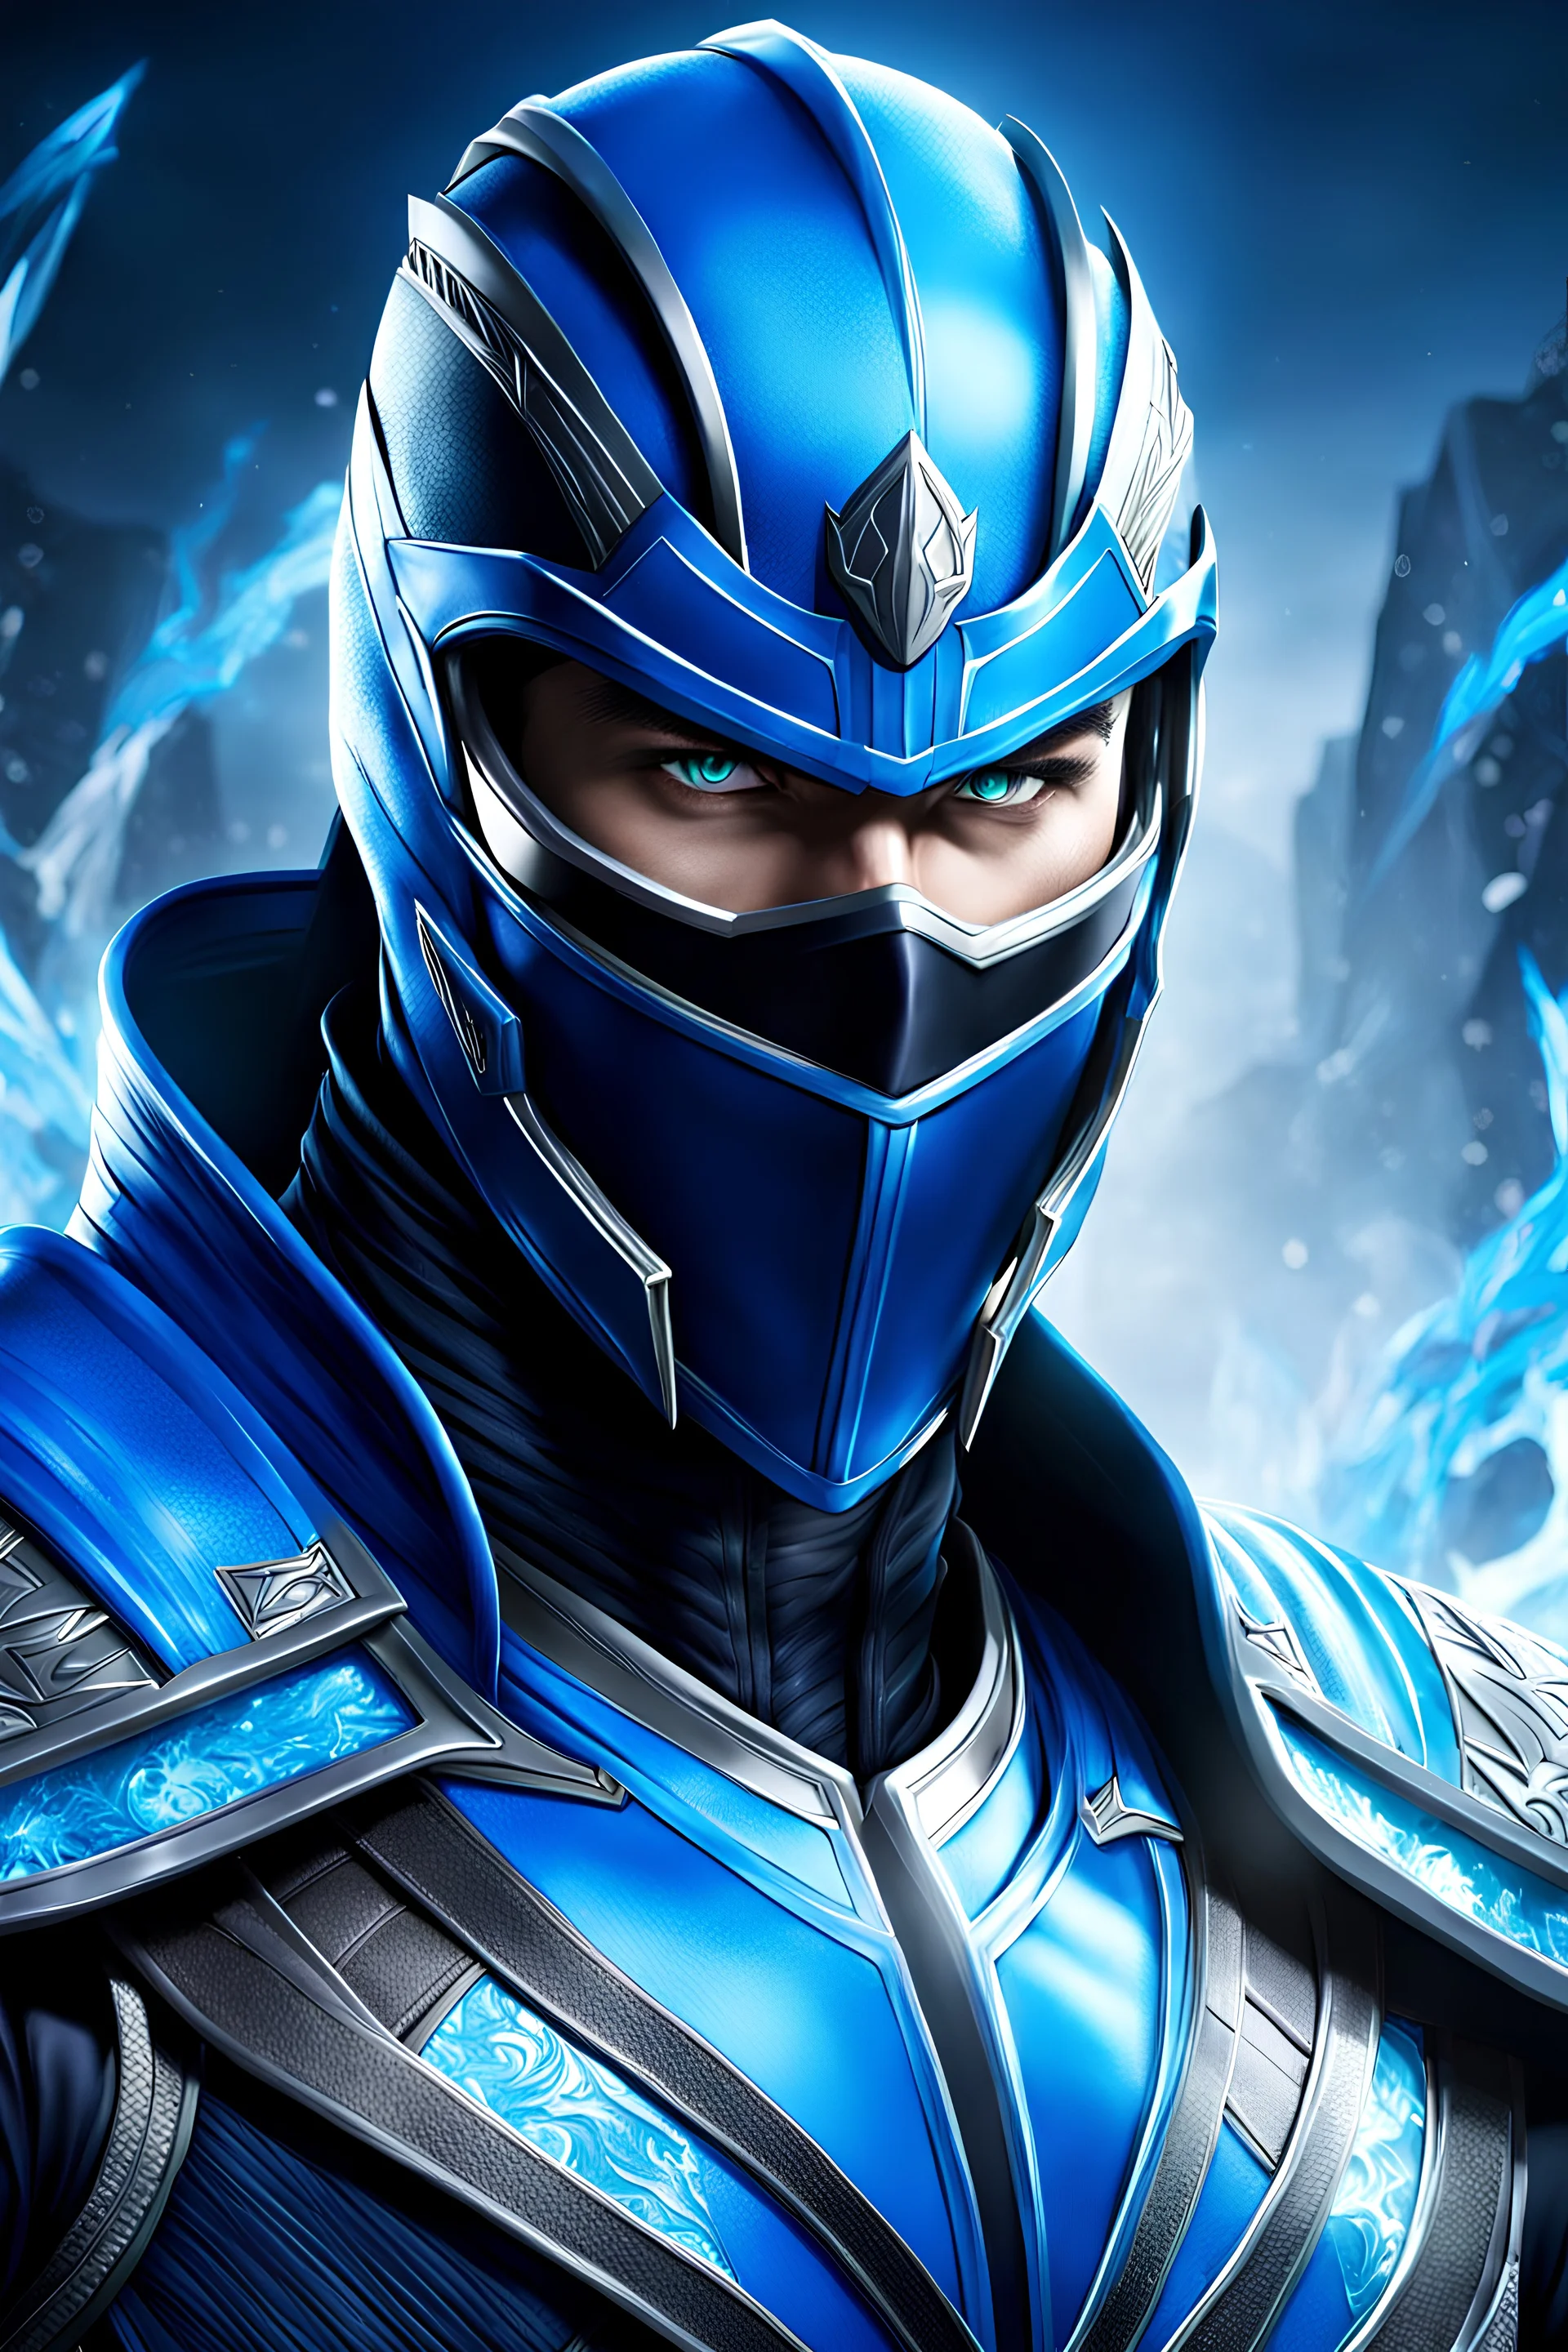 portrait of Sub-Zero from Mortal Kombat, 4k resolution, anime line art, with clear lines, no shadows, on a pure ice background suitable for Sub-Zero, fully colored with stunning colors